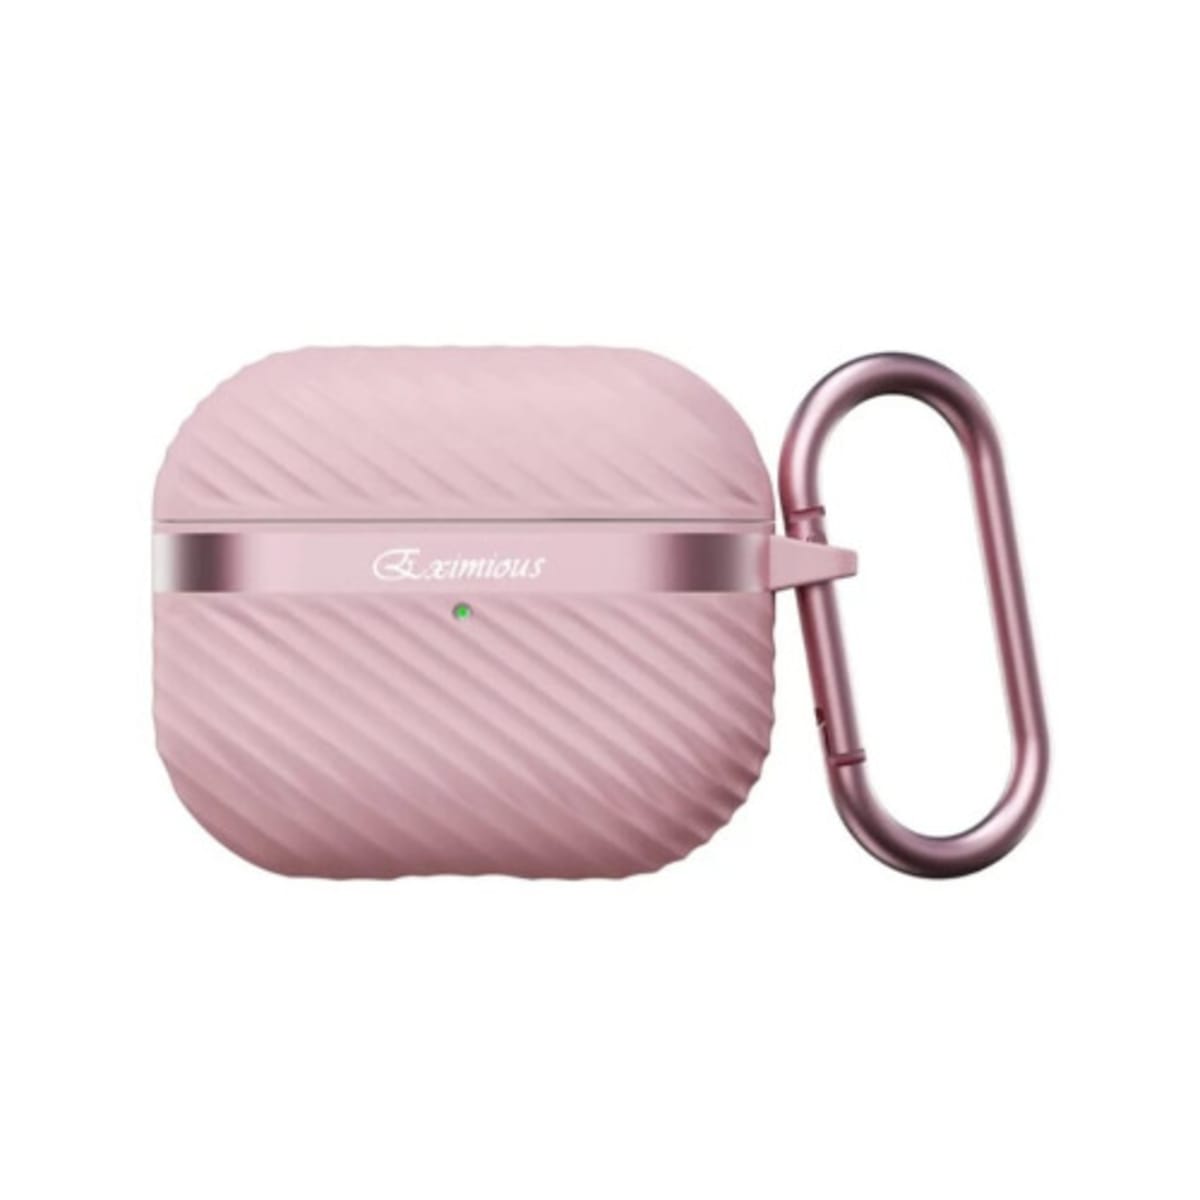 Apple AirPods Pro 2 Case Urban Fit